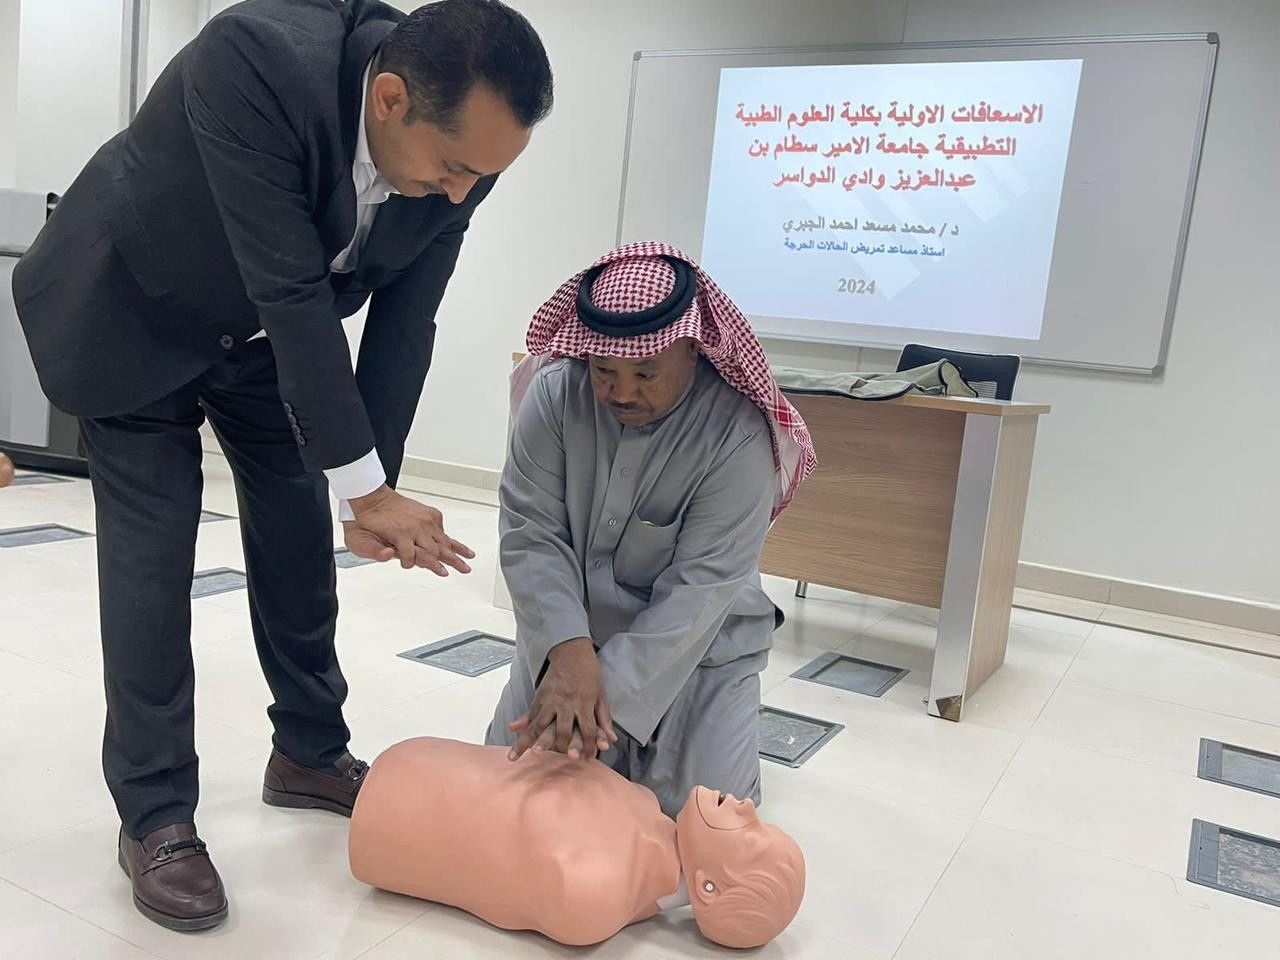 Basic principles of first aid workshop